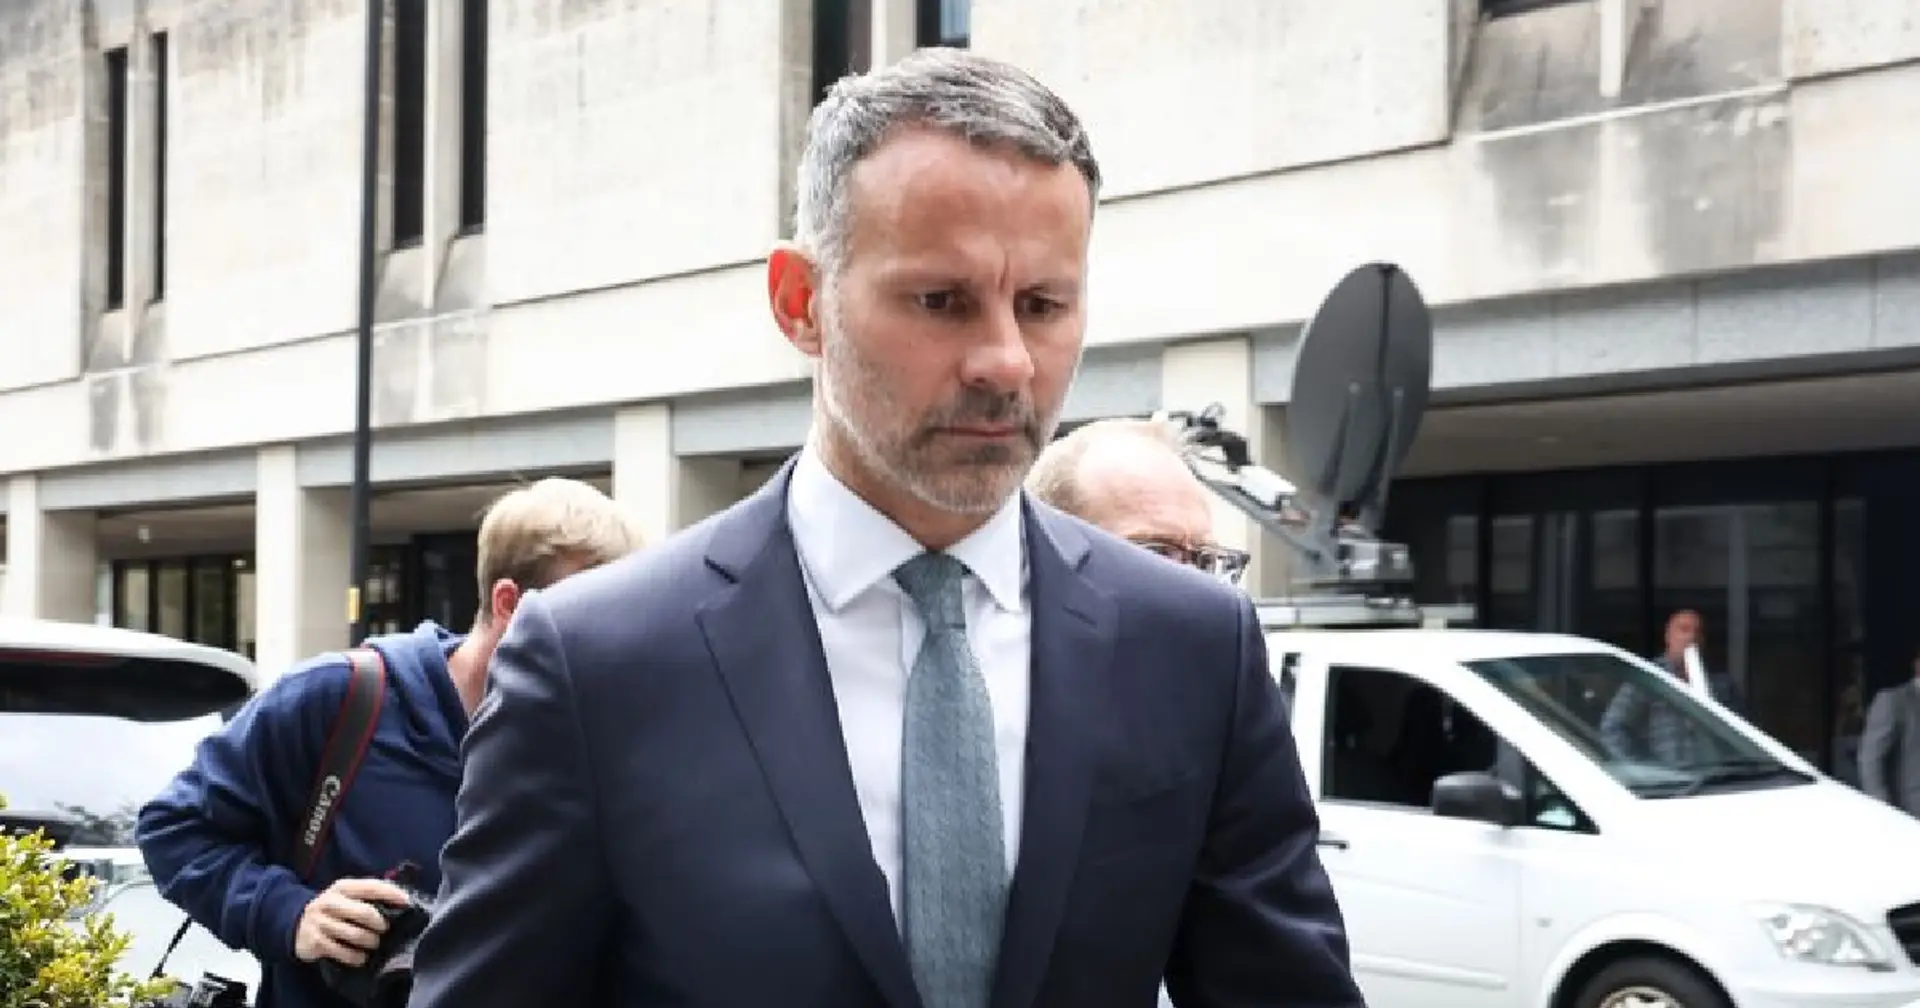 Ryan Giggs NOT GUILTY of domestic abuse charges as case dropped